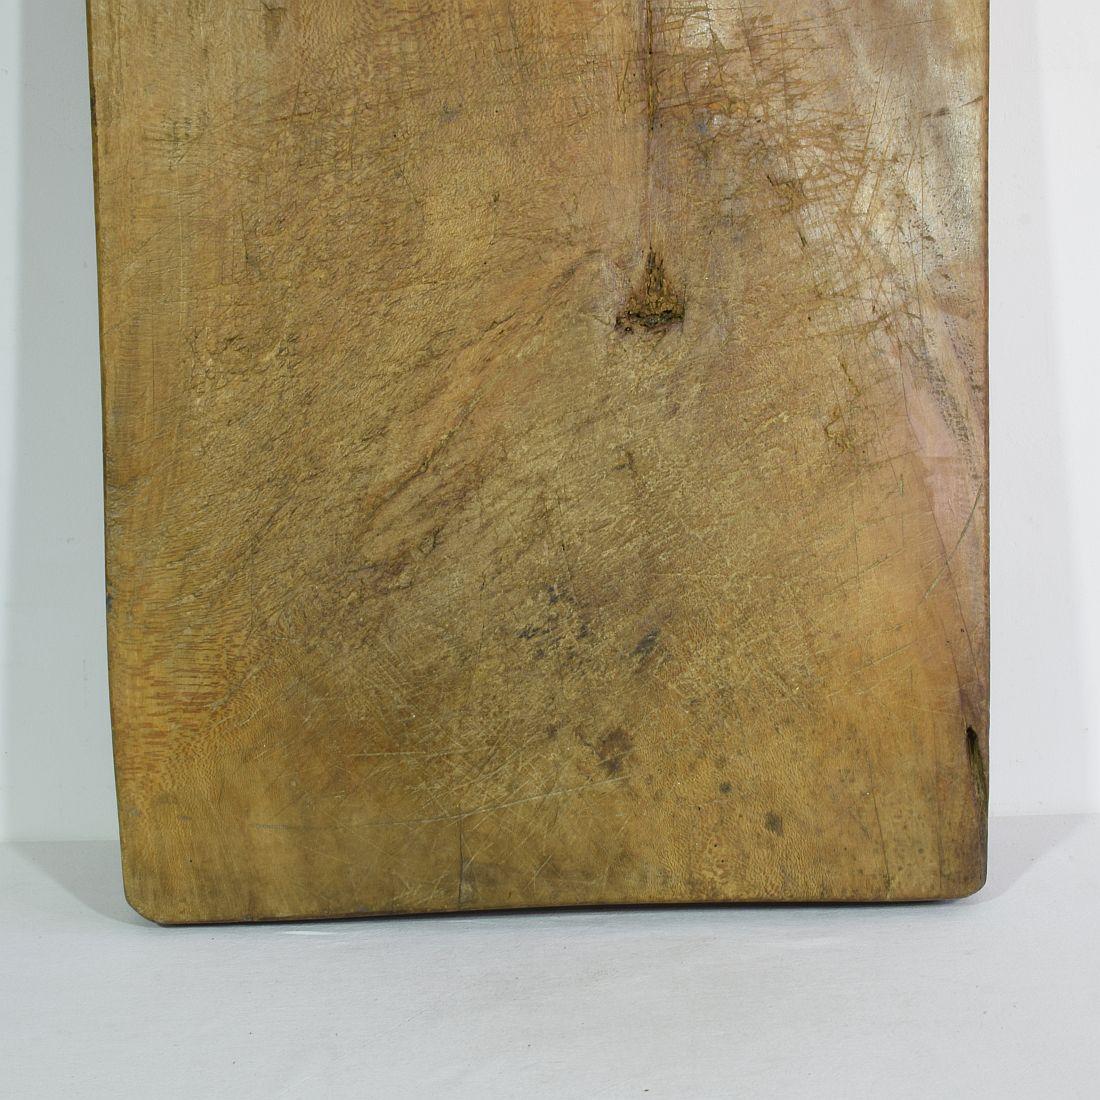 Giant 19th Century, French Wooden Chopping or Cutting Board 10